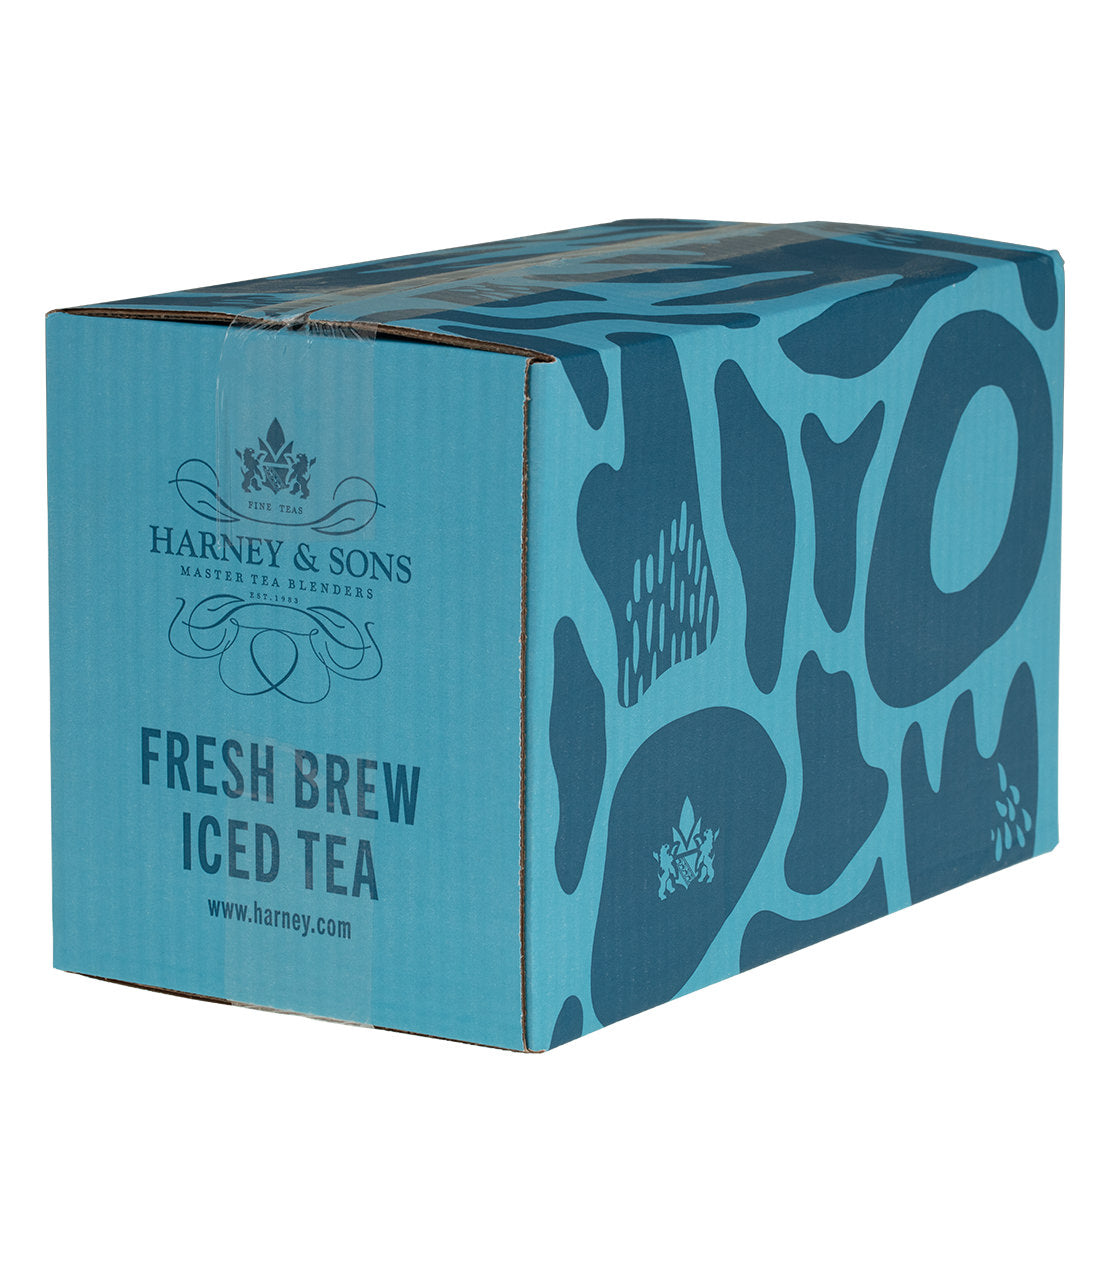 Organic Green with Citrus & Ginkgo Fresh Brew Iced Tea - Iced Tea Pouches Box of 50 Pouches - Harney & Sons Fine Teas